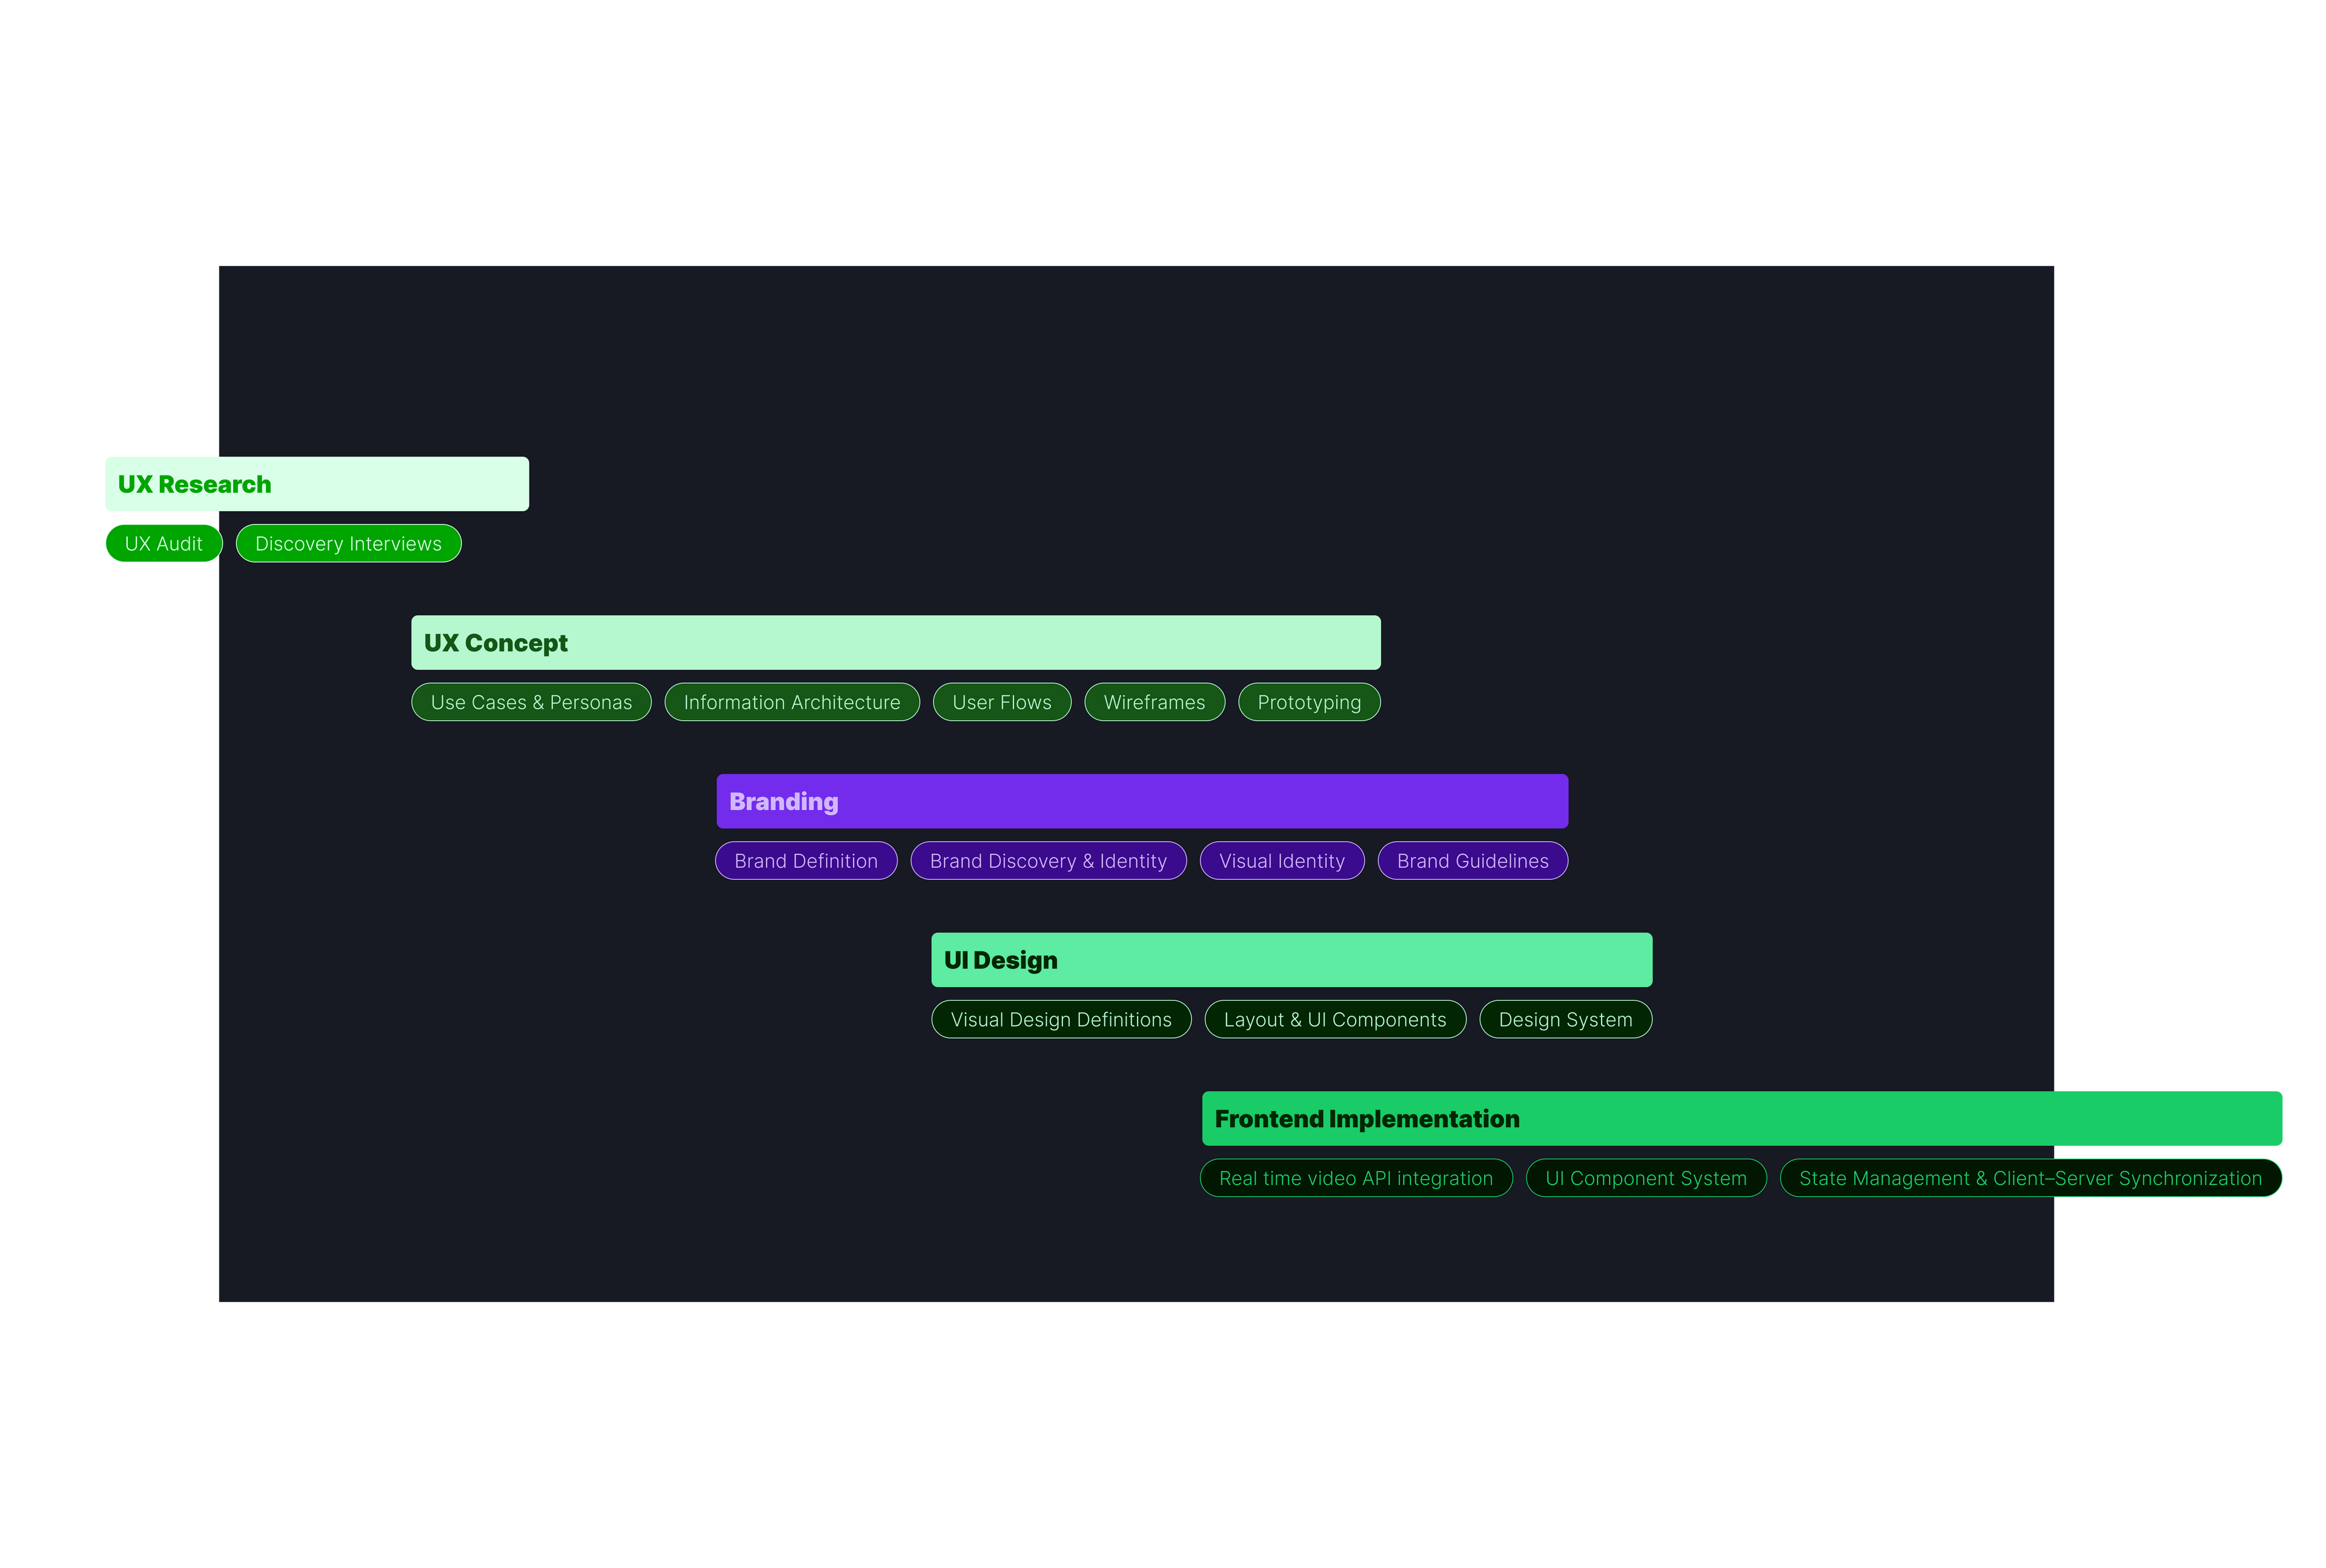 a timeline showing the stages of the project highlighted with colors